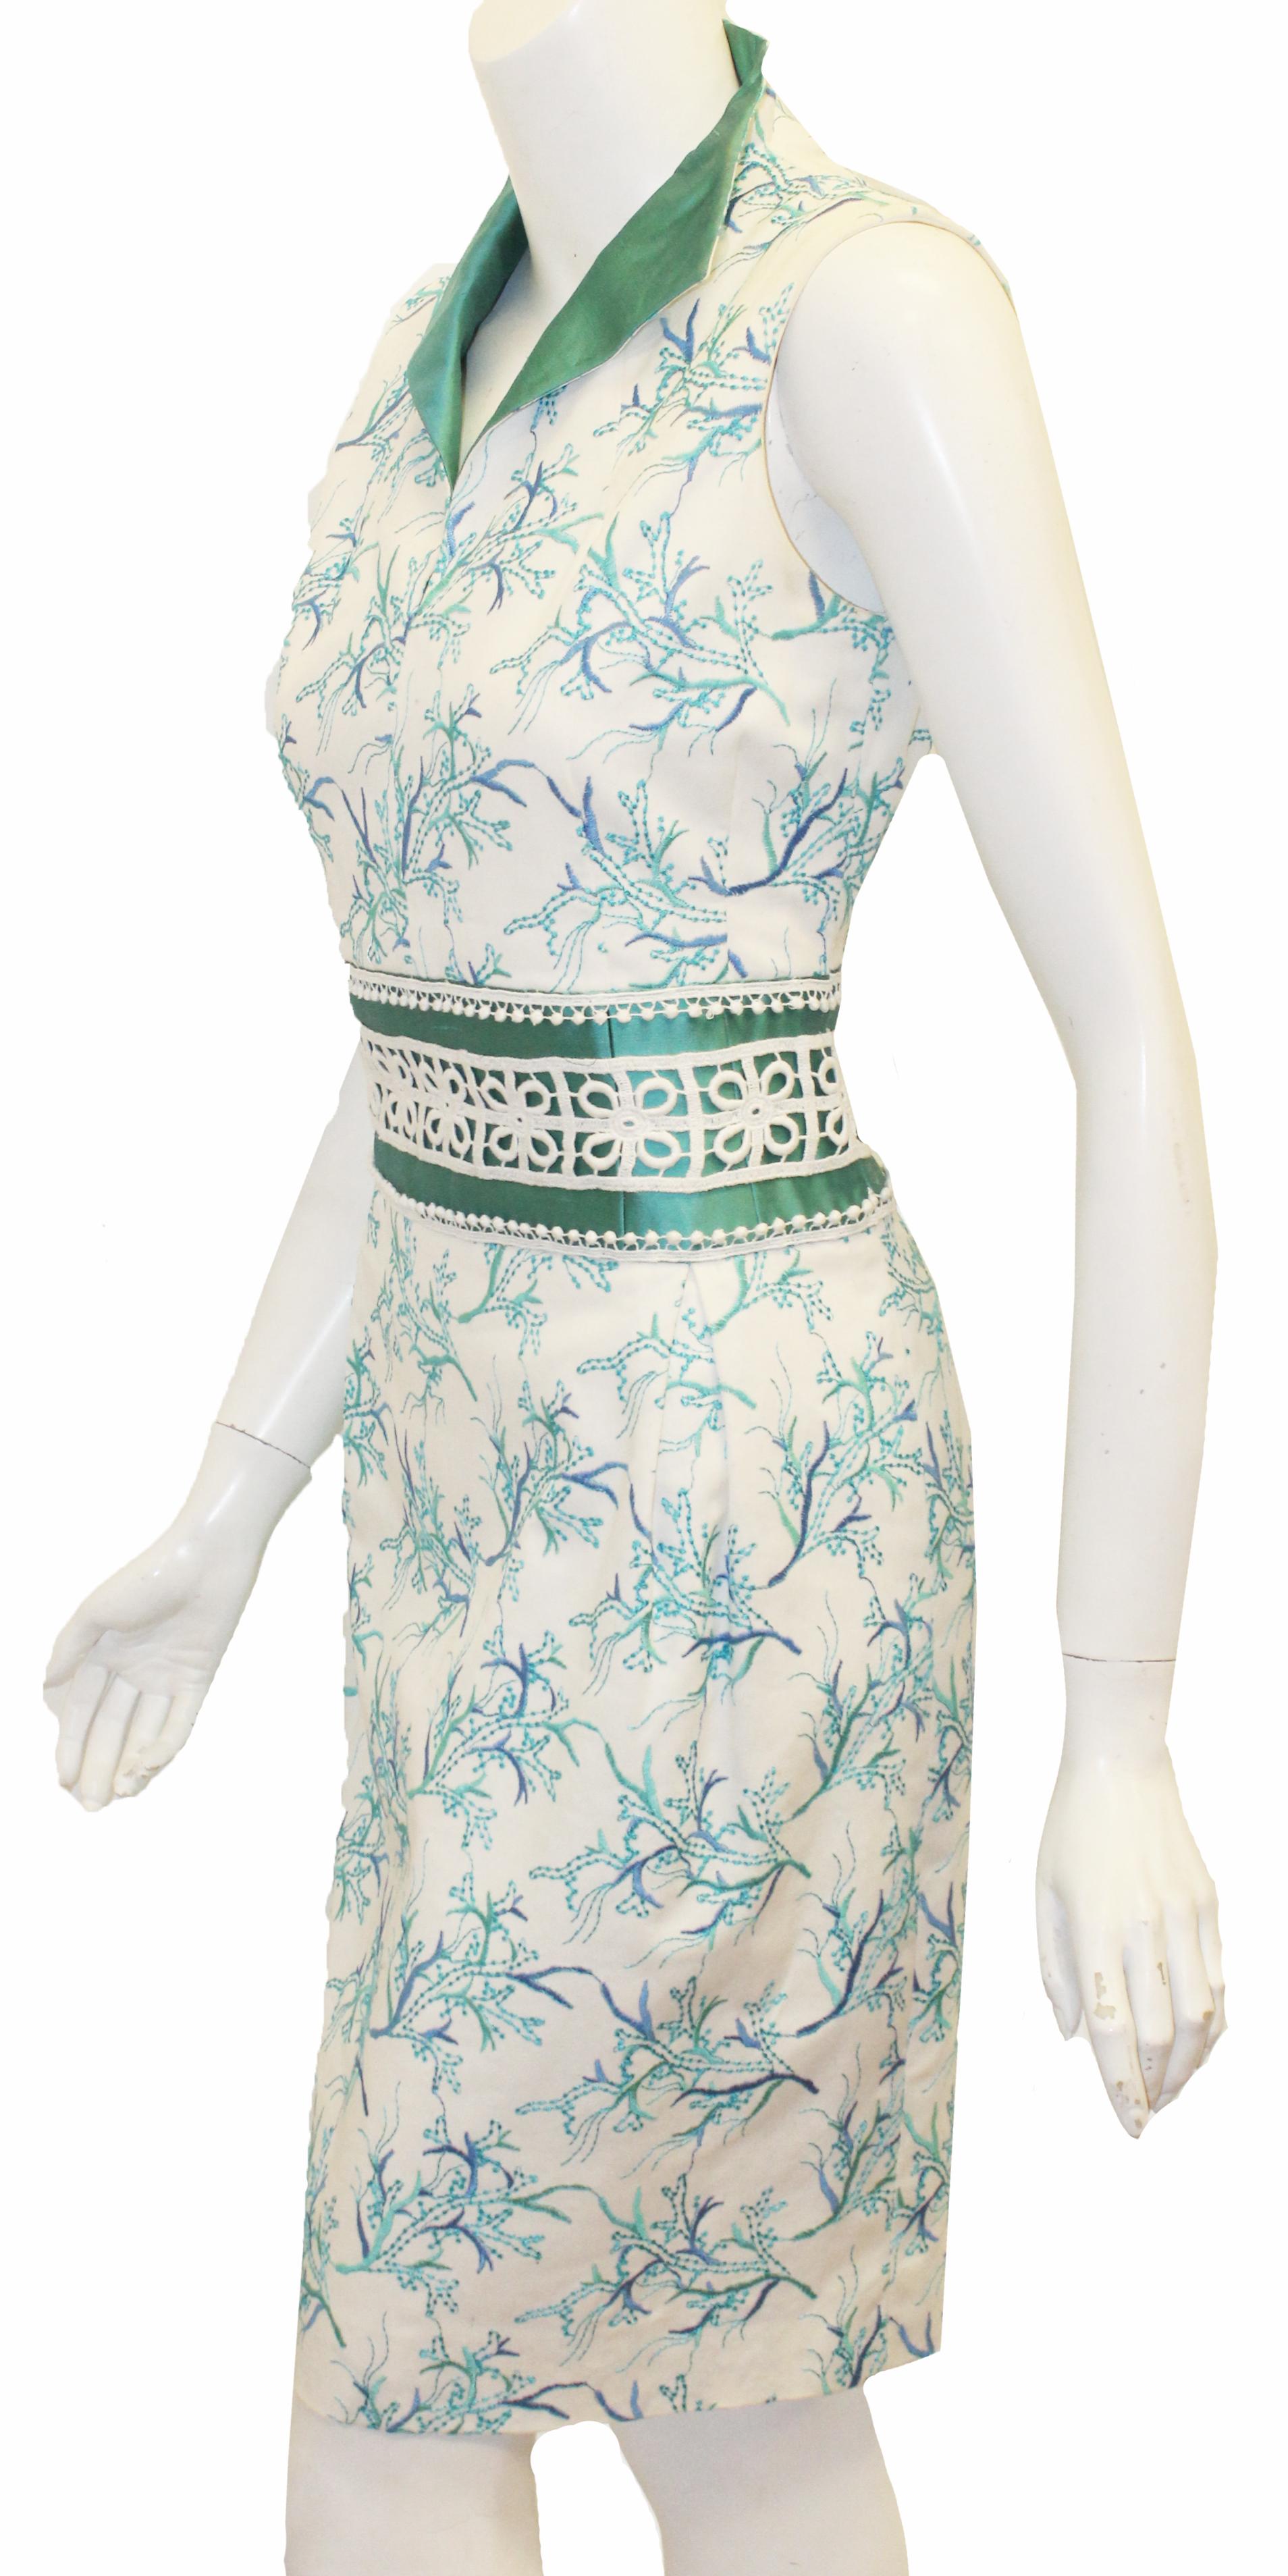 Paola Quadretti stunning white and turquoise embroidered figure flattering dress includes a waist cinching silk turquoise band enhanced with white cotton crochet lace.  The same turquoise silk fabric on the waist is used on the turn up collar.  With